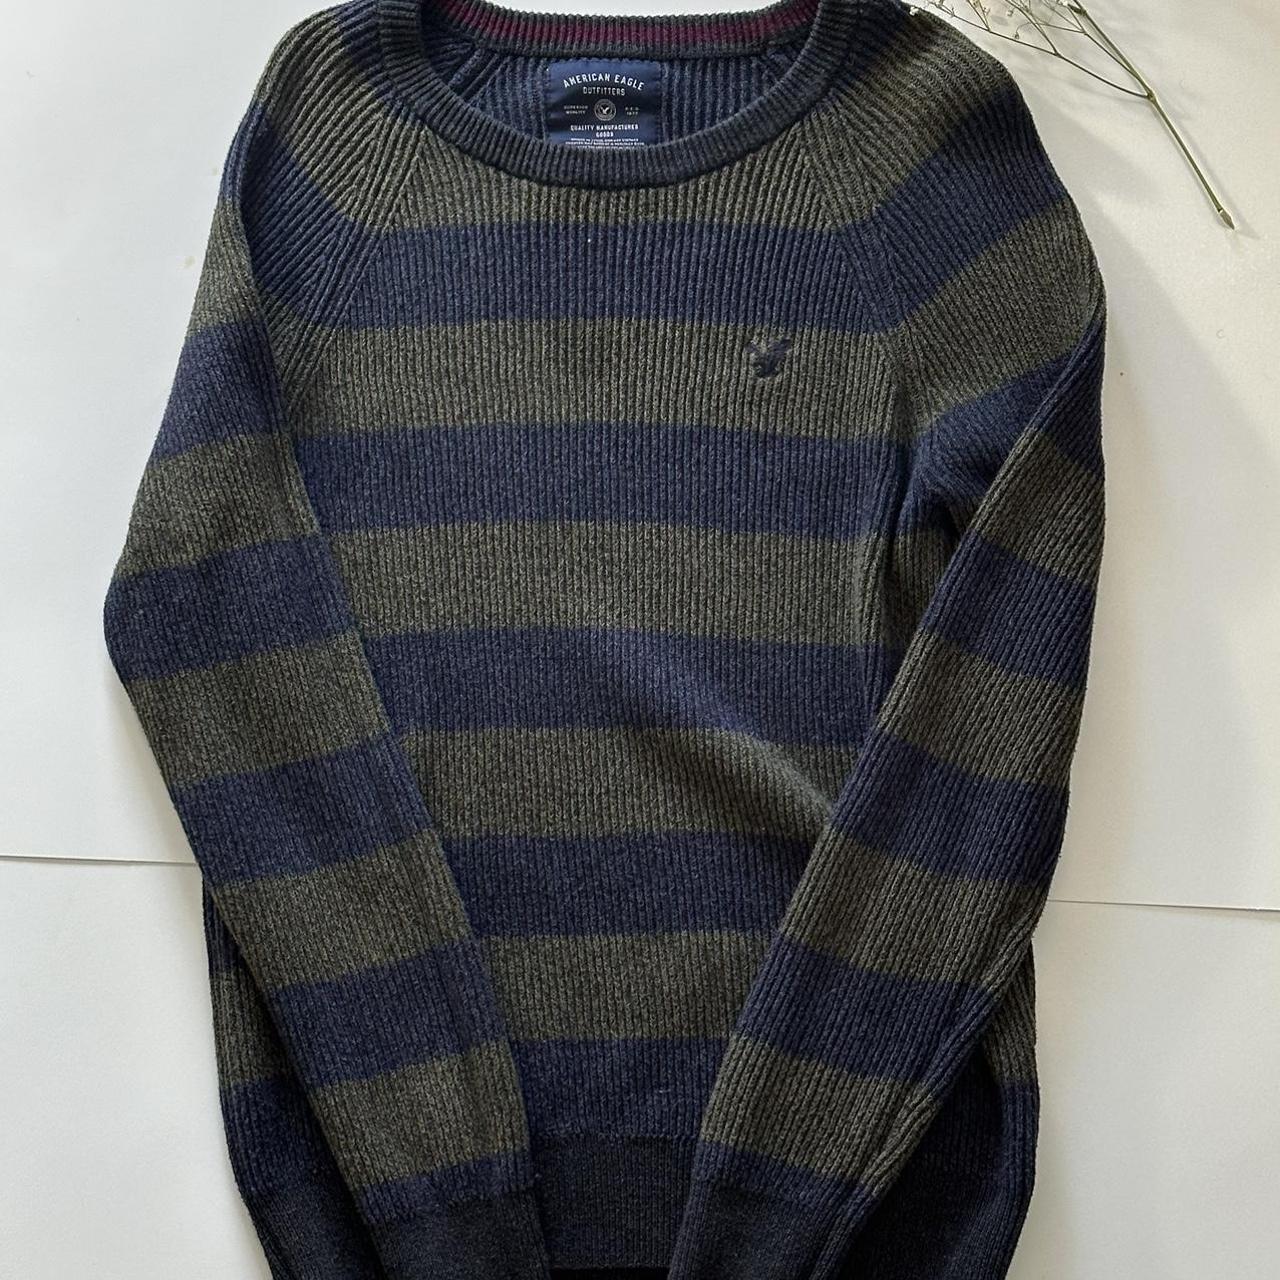 American eagle green and navy black stripe sweater - Depop